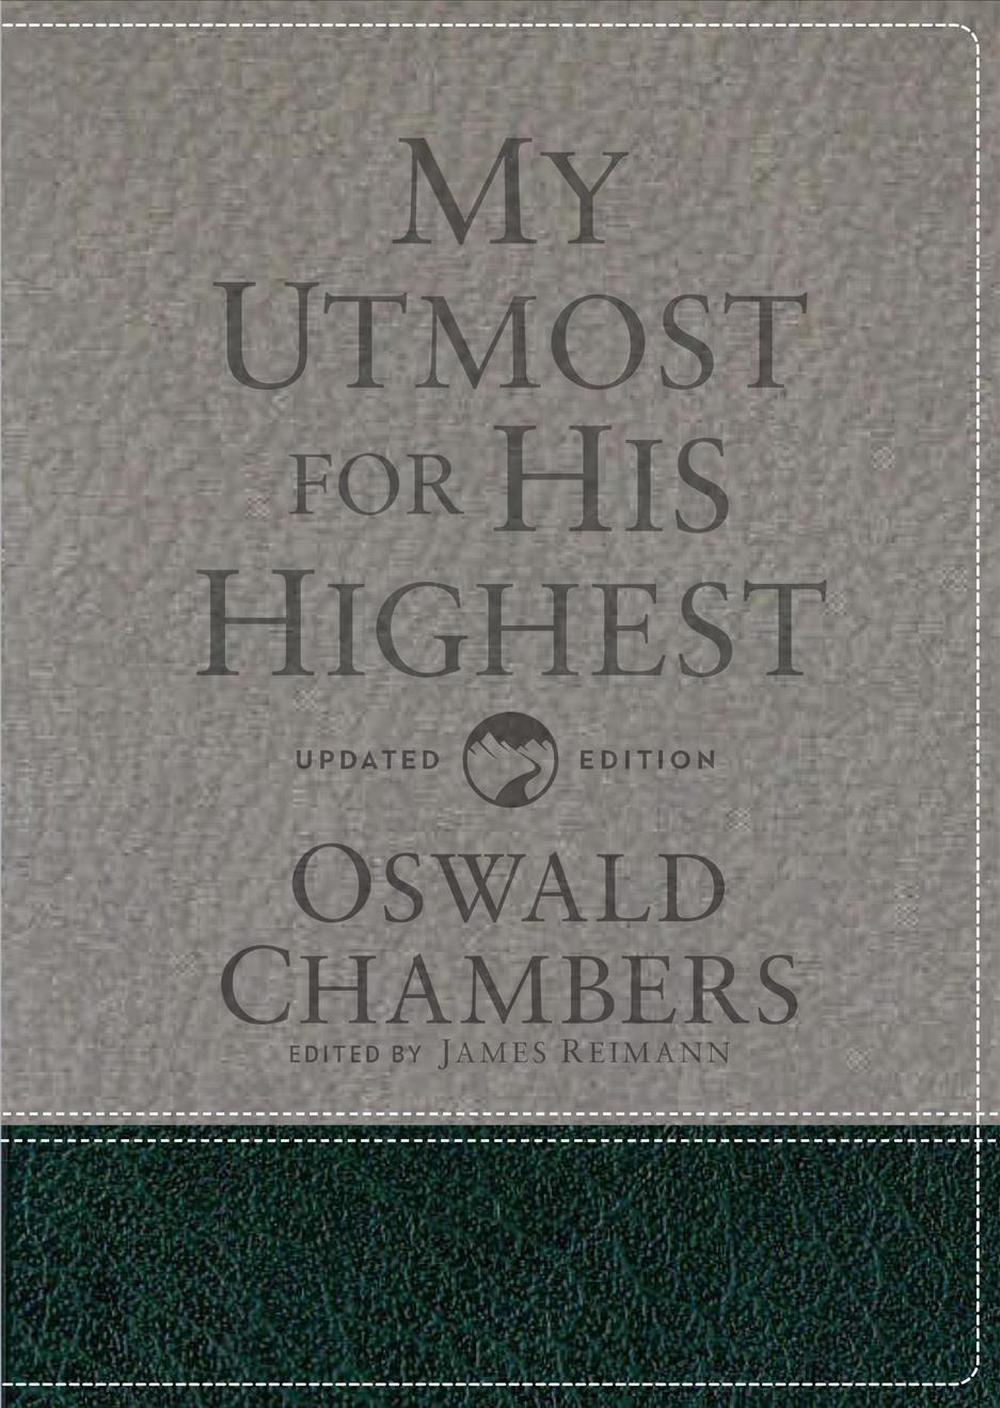 oswald chambers utmost for his highest